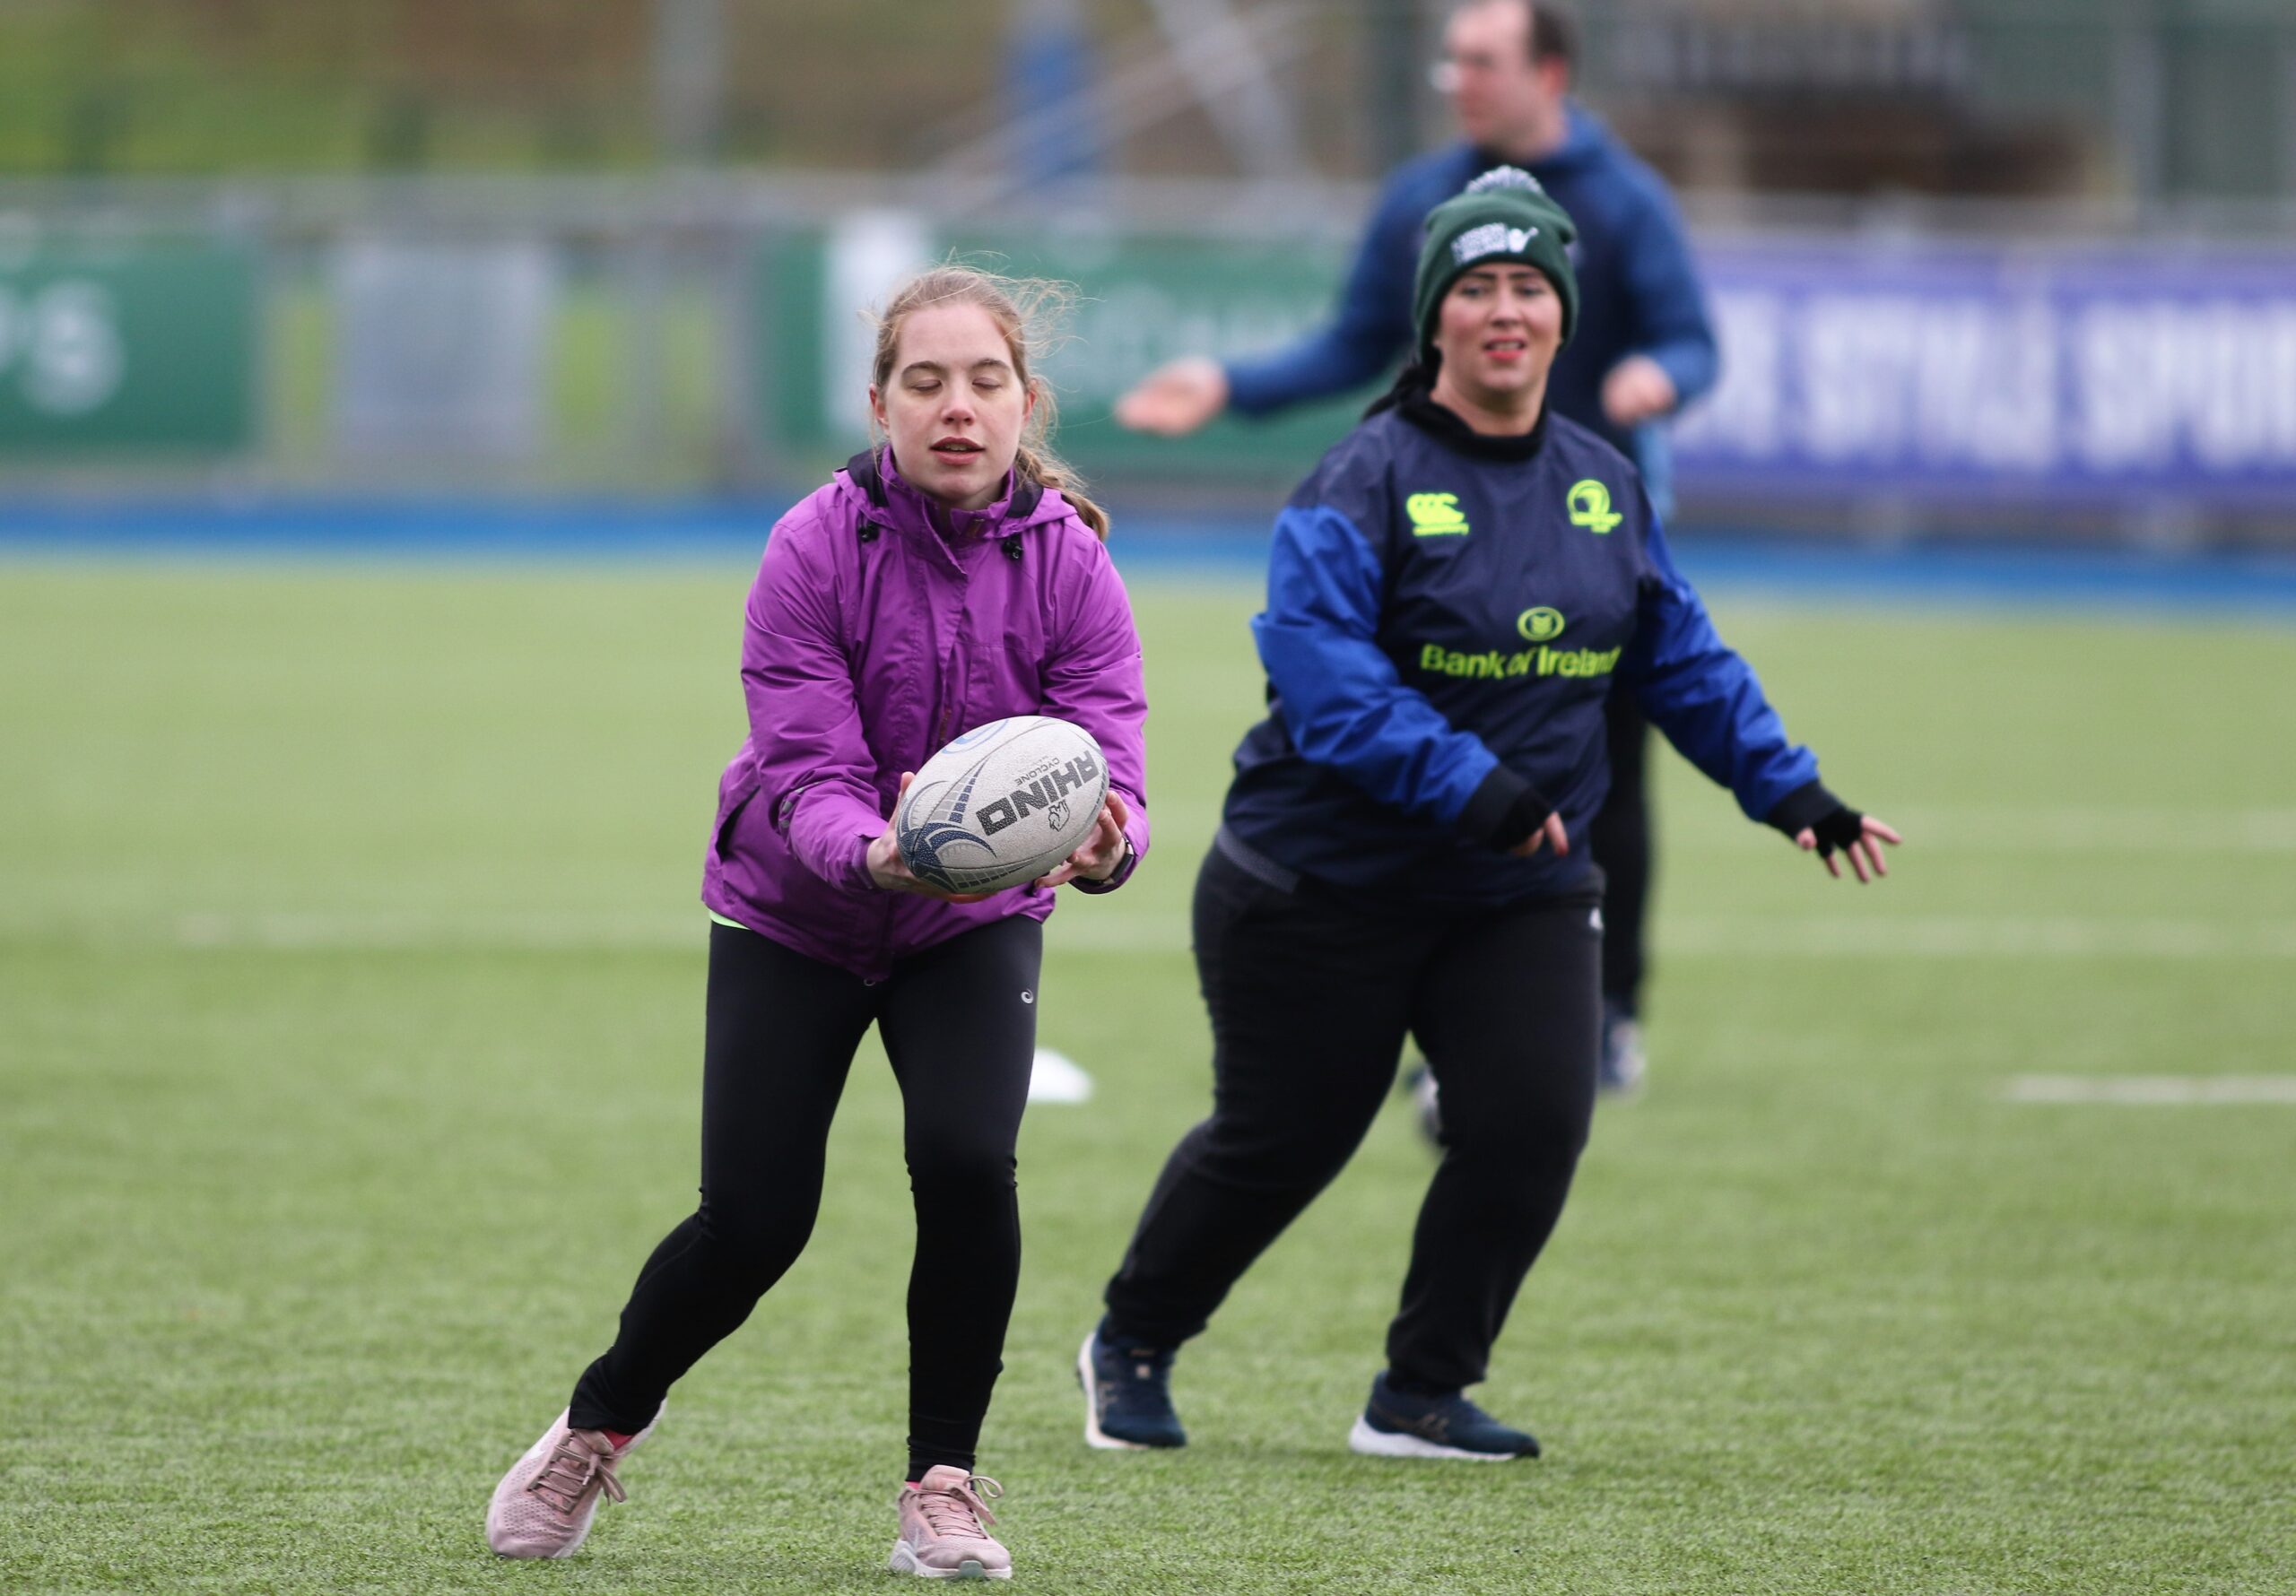 A young woman who is wearing a purple top catches a rugby ball, while another woman who is wearing a Leinster training outfit runs in behind her ready to receive a pass.